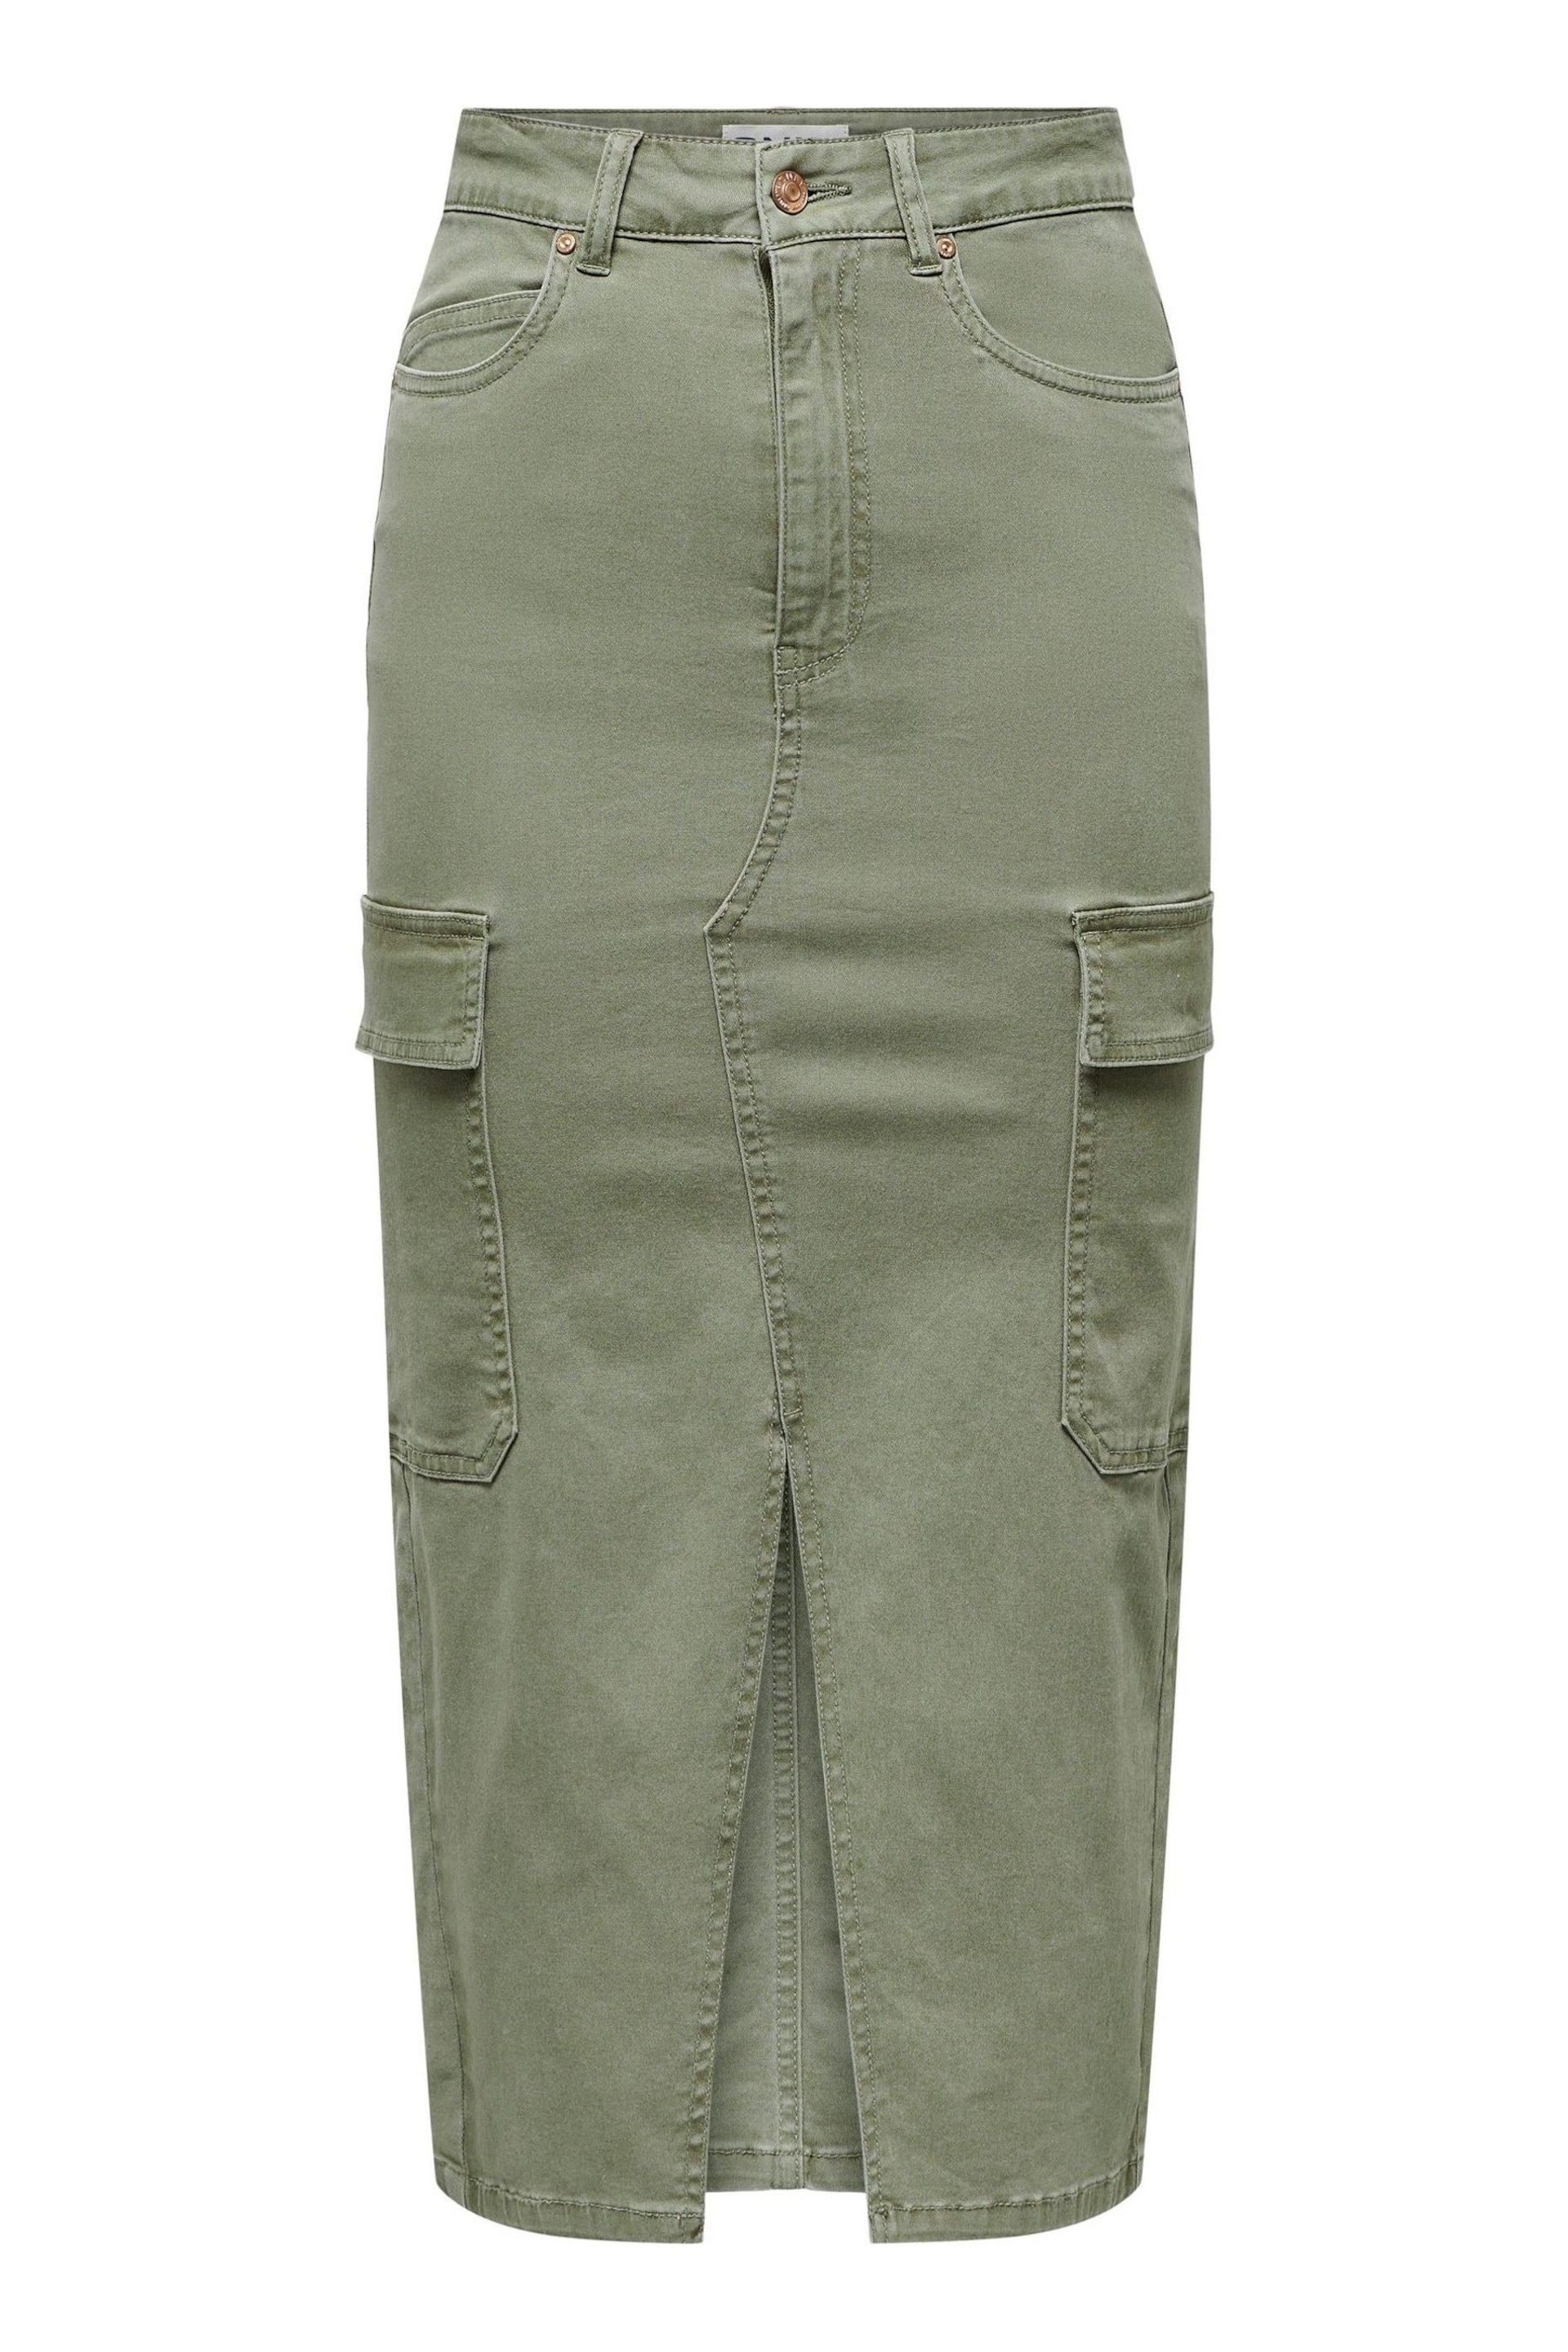 ONLY Green Utility Midi Skirt With Front Split - Image 7 of 8